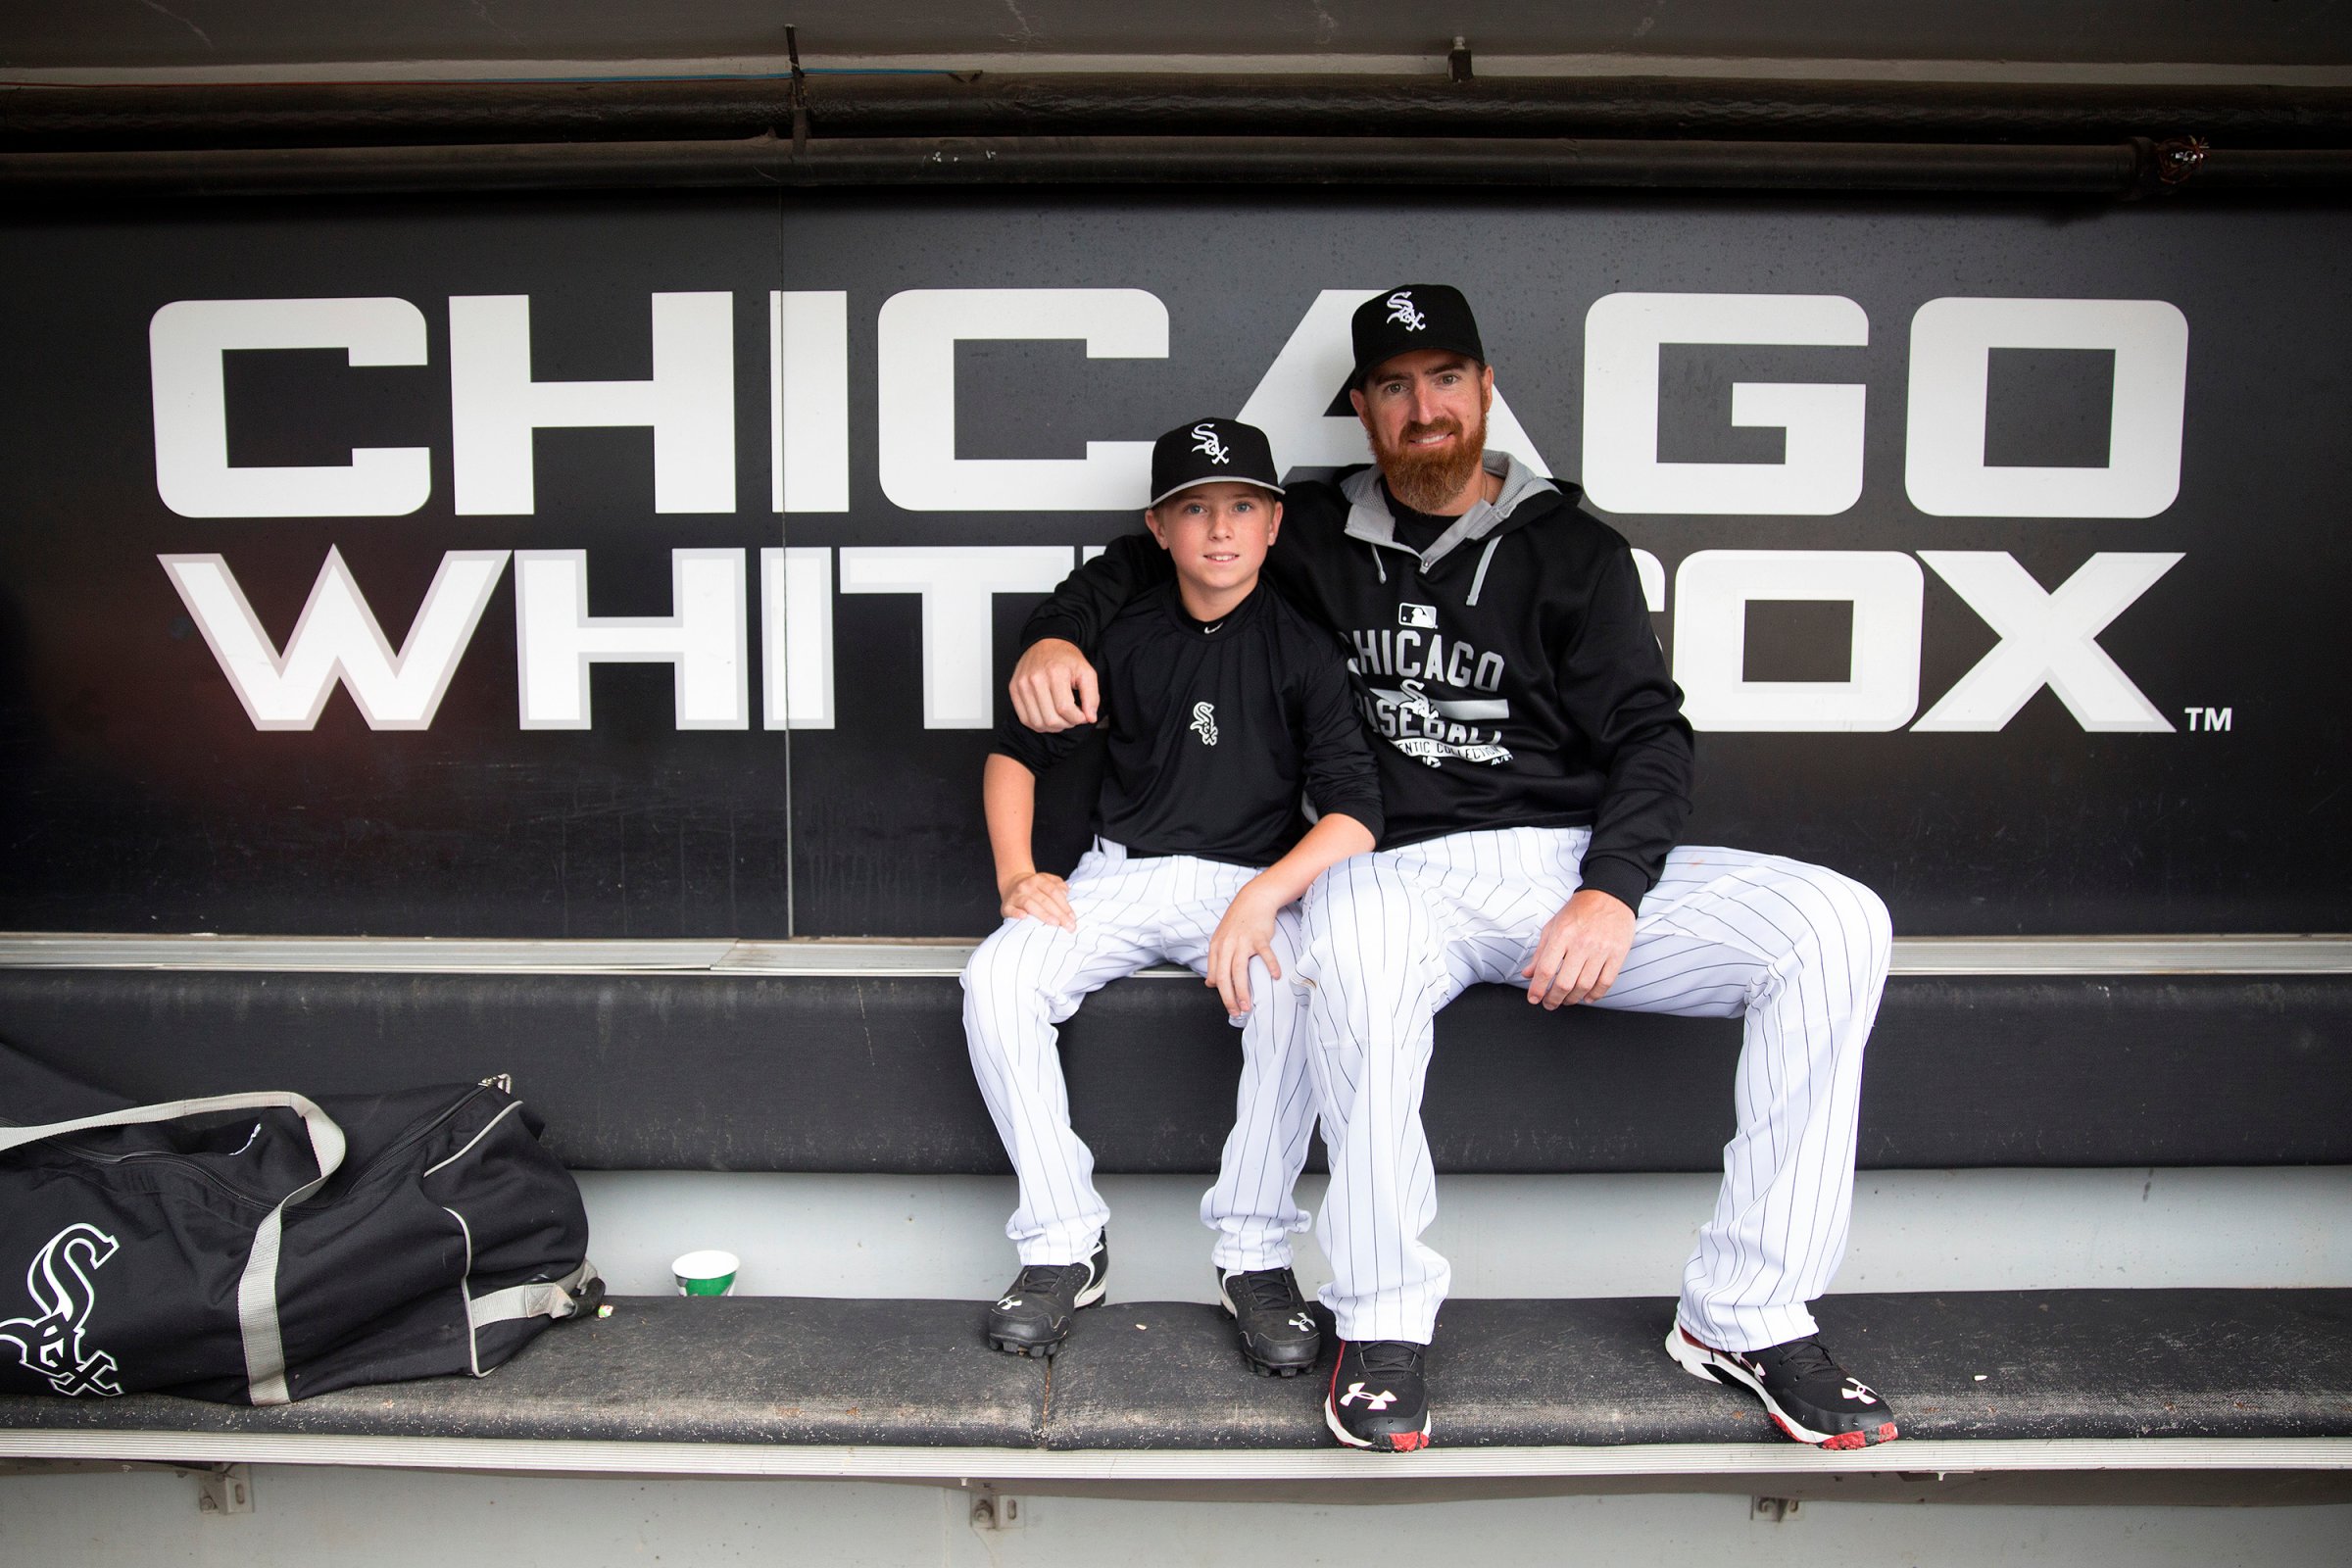 Chicago White Sox designated hitter Adam LaRoche (25) sits with his son Drake, 13, in the White Sox dugout at U.S. Cellular Field before a game against the Houston Astros on June 8, 2015 in Chicago.